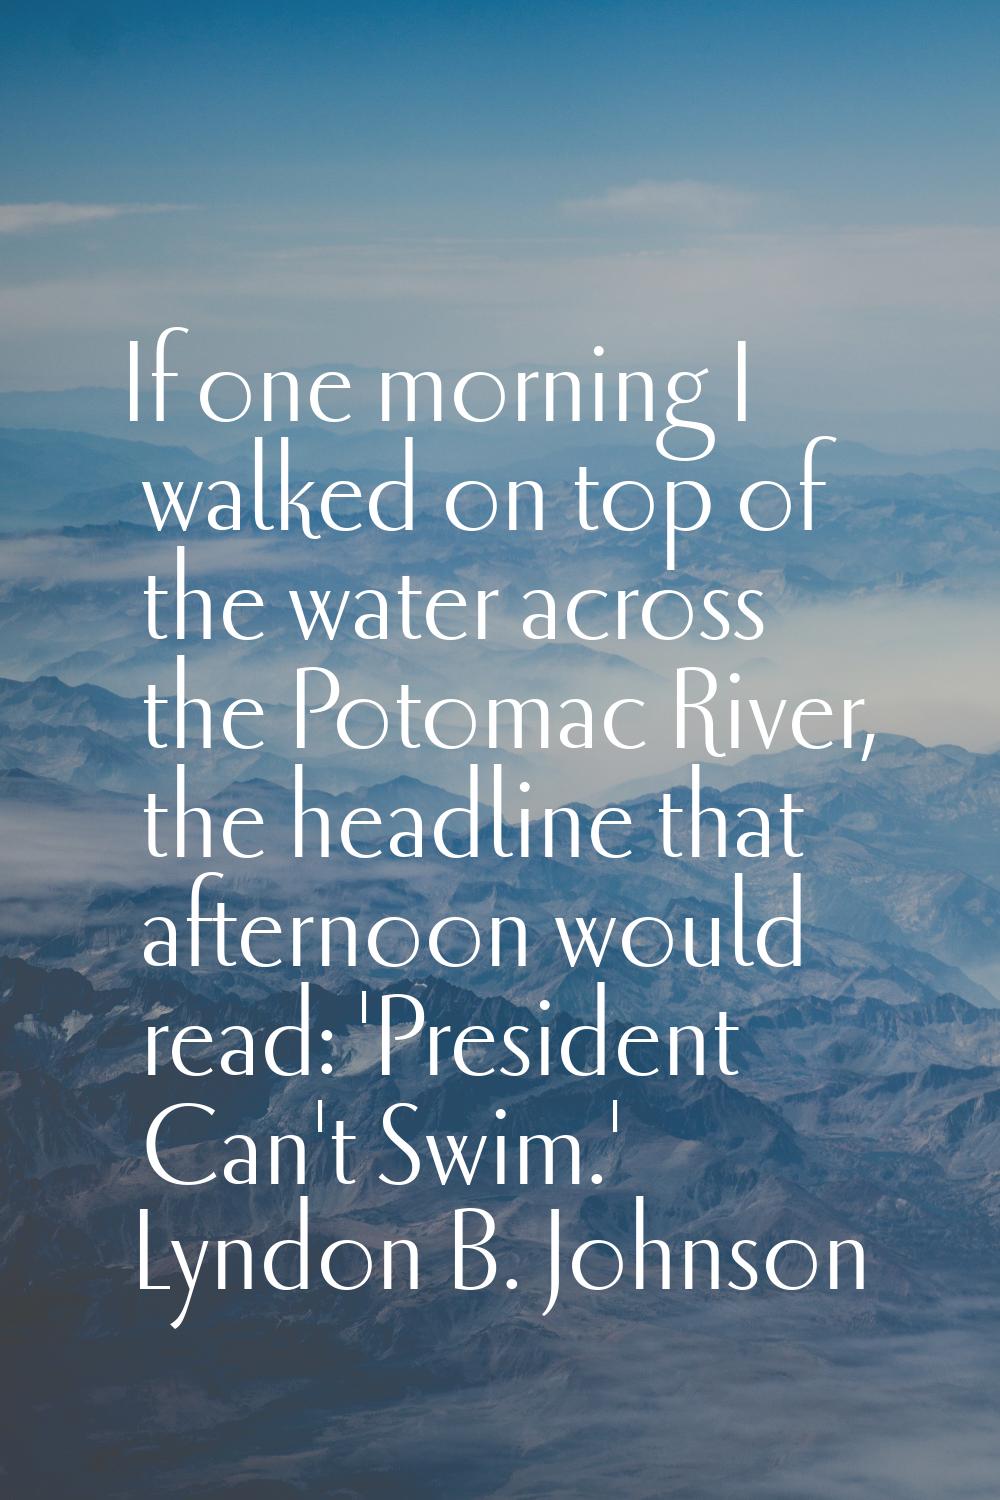 If one morning I walked on top of the water across the Potomac River, the headline that afternoon w